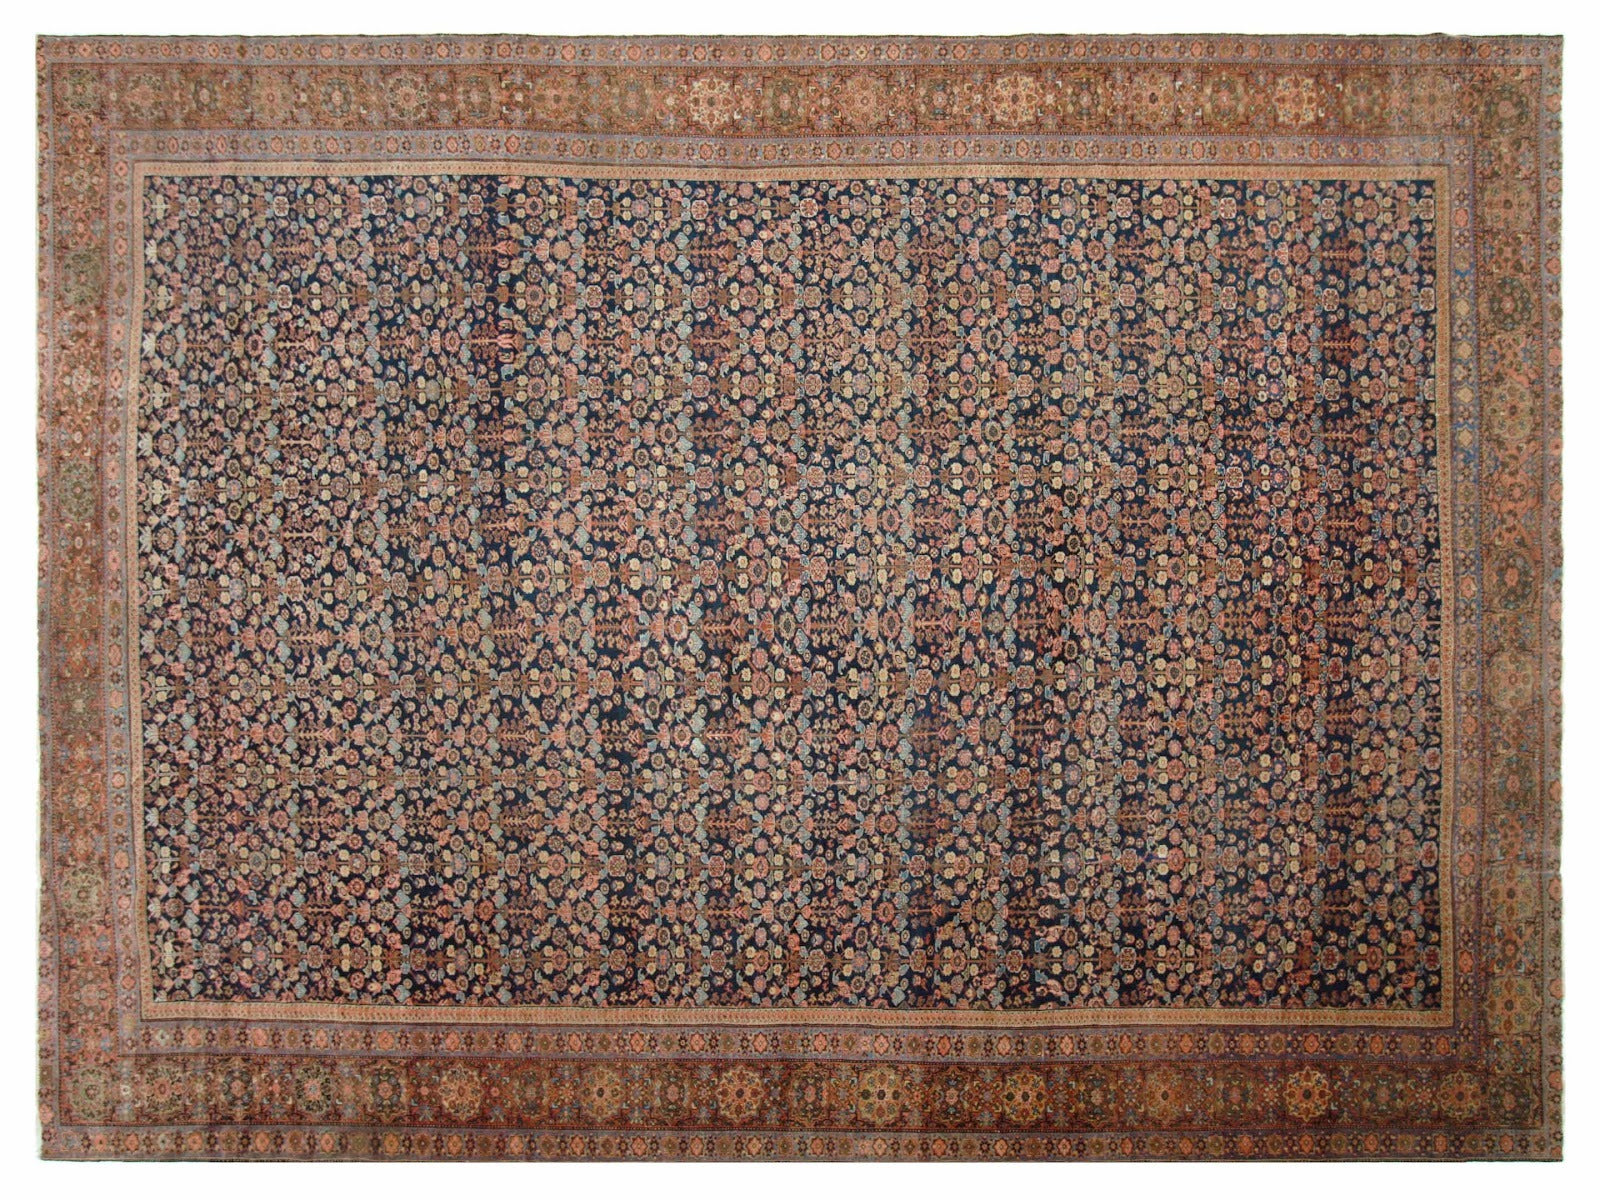 14x17 Vintage Persian Sultanabad Wool Rug with Rust Border and Navy Background